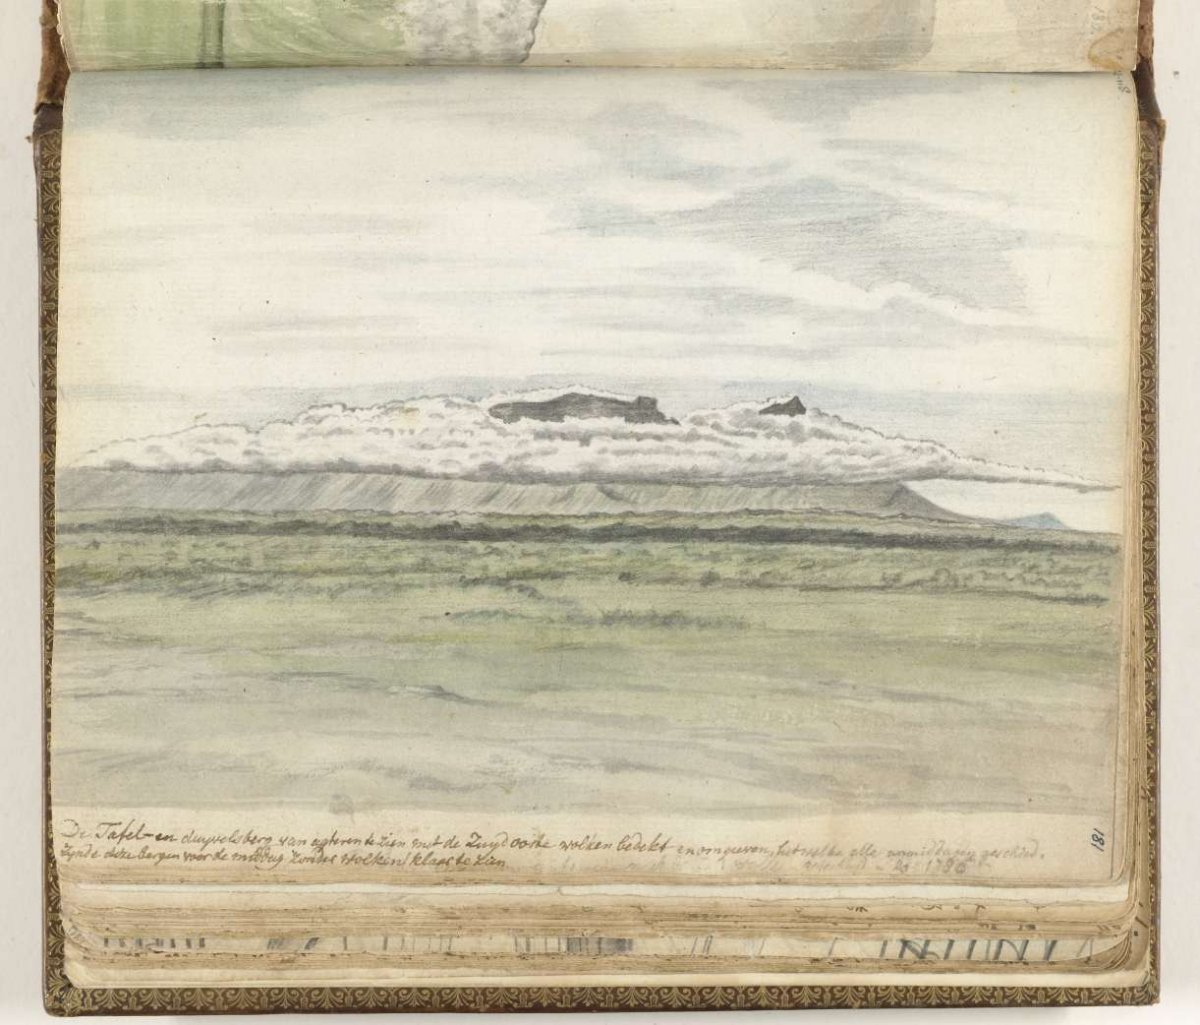 Table and Dove Mountain seen from the landside, Jan Brandes, 1786